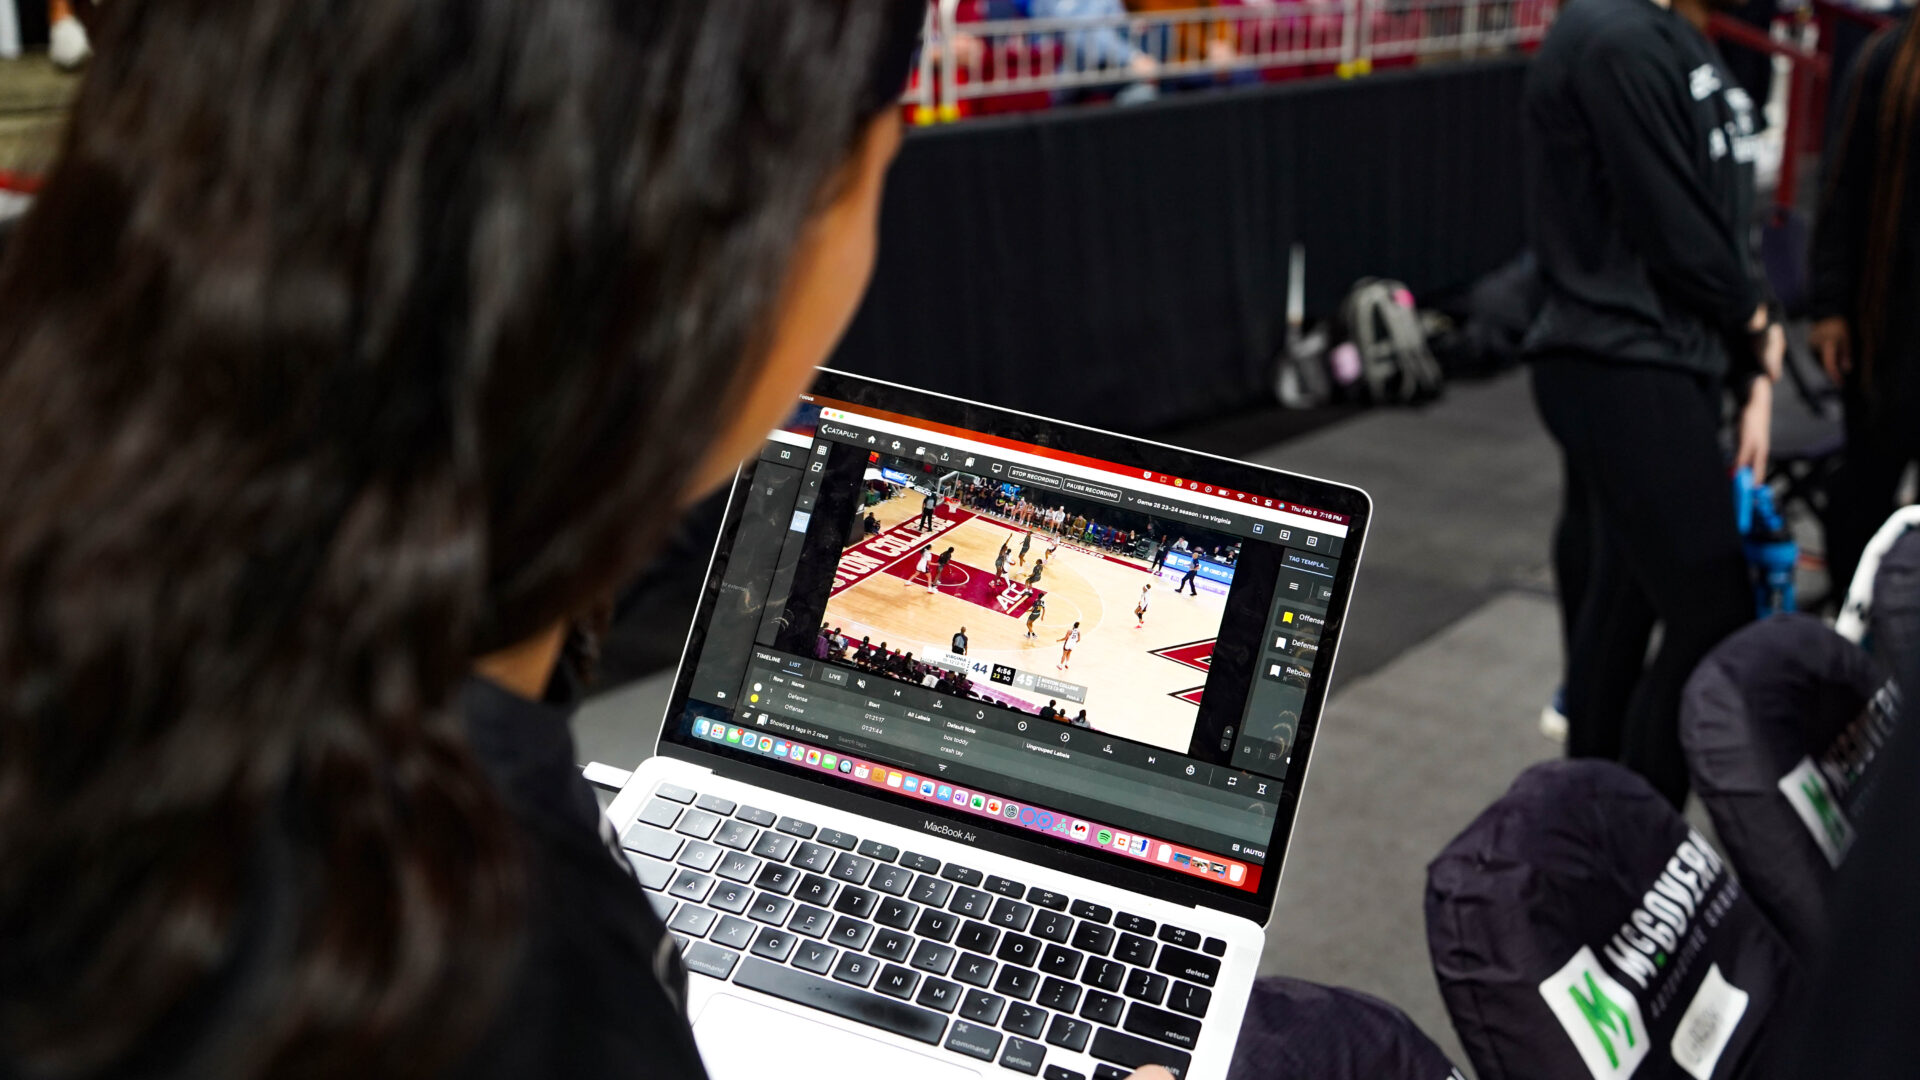 A focused interaction between a Boston College basketball player and a coach is taking place, with the Pro Video Focus analysis visible on the laptop screen. This highlights the integration of live video analysis in their training, crucial for enhancing performance and in-game tactics.